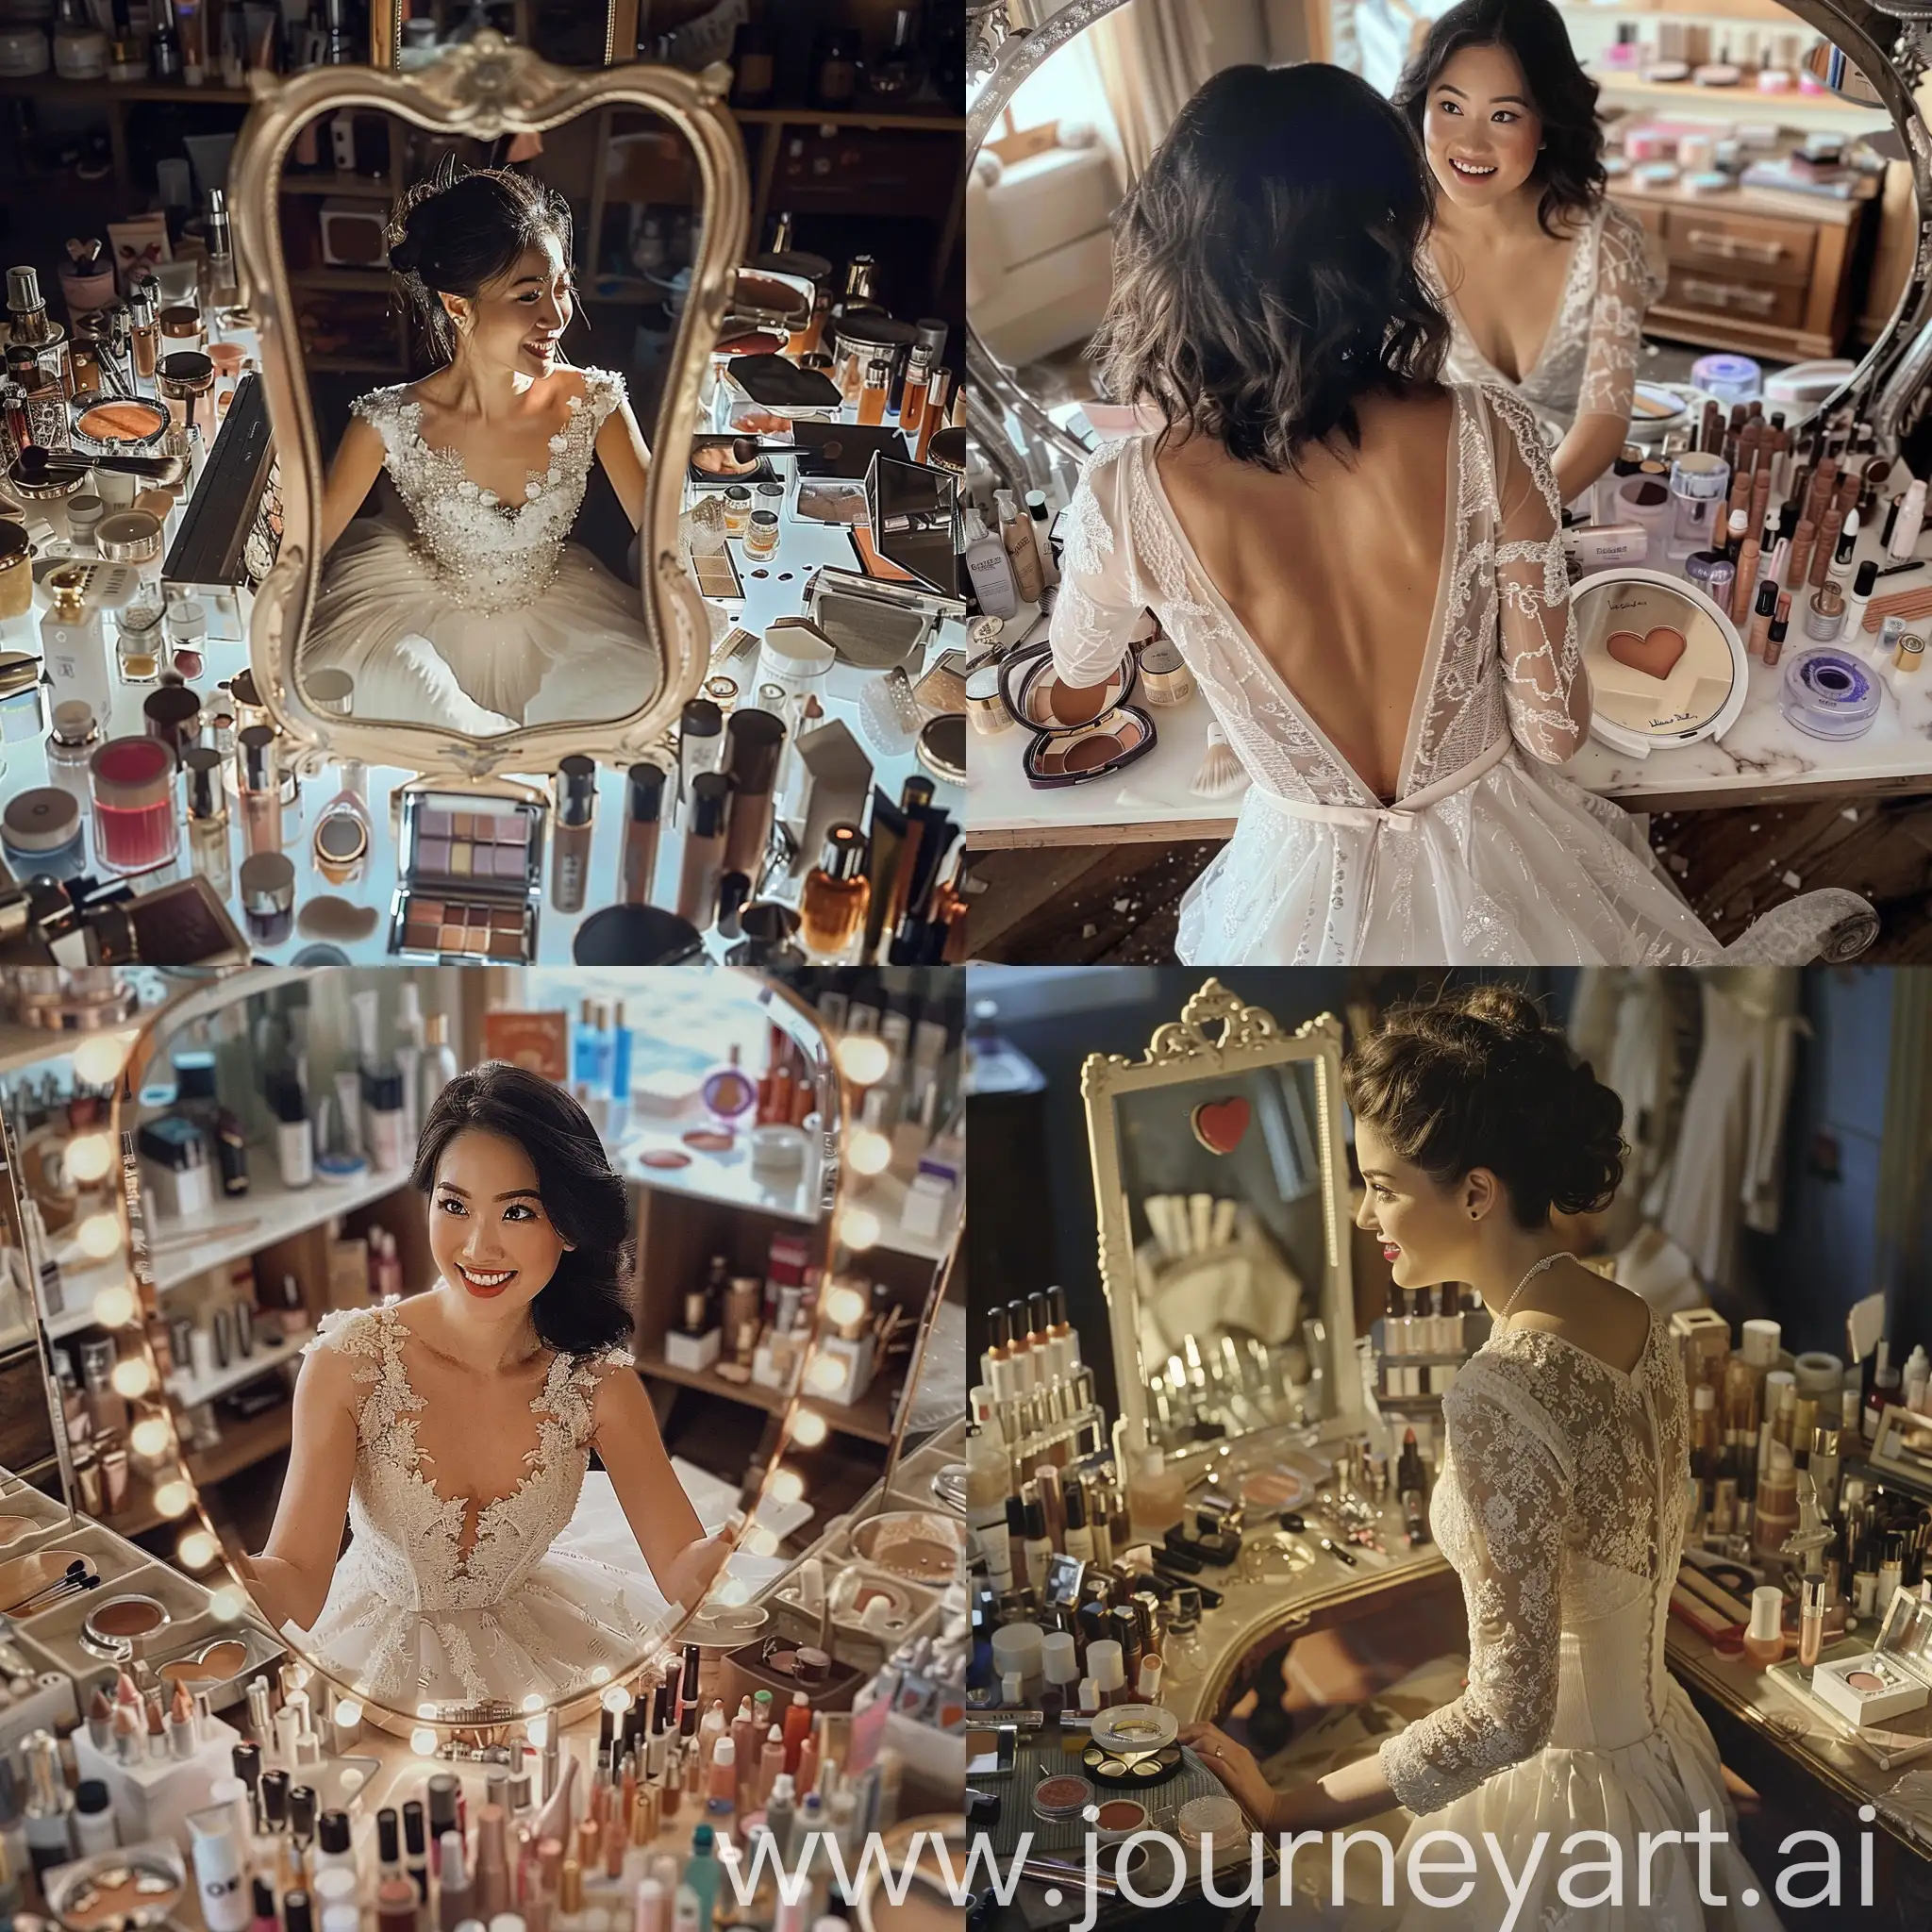 Image of a woman wearing a white dress sitting and looking in a mirror smile to yourself see the heart inside The table was full of cosmetics.